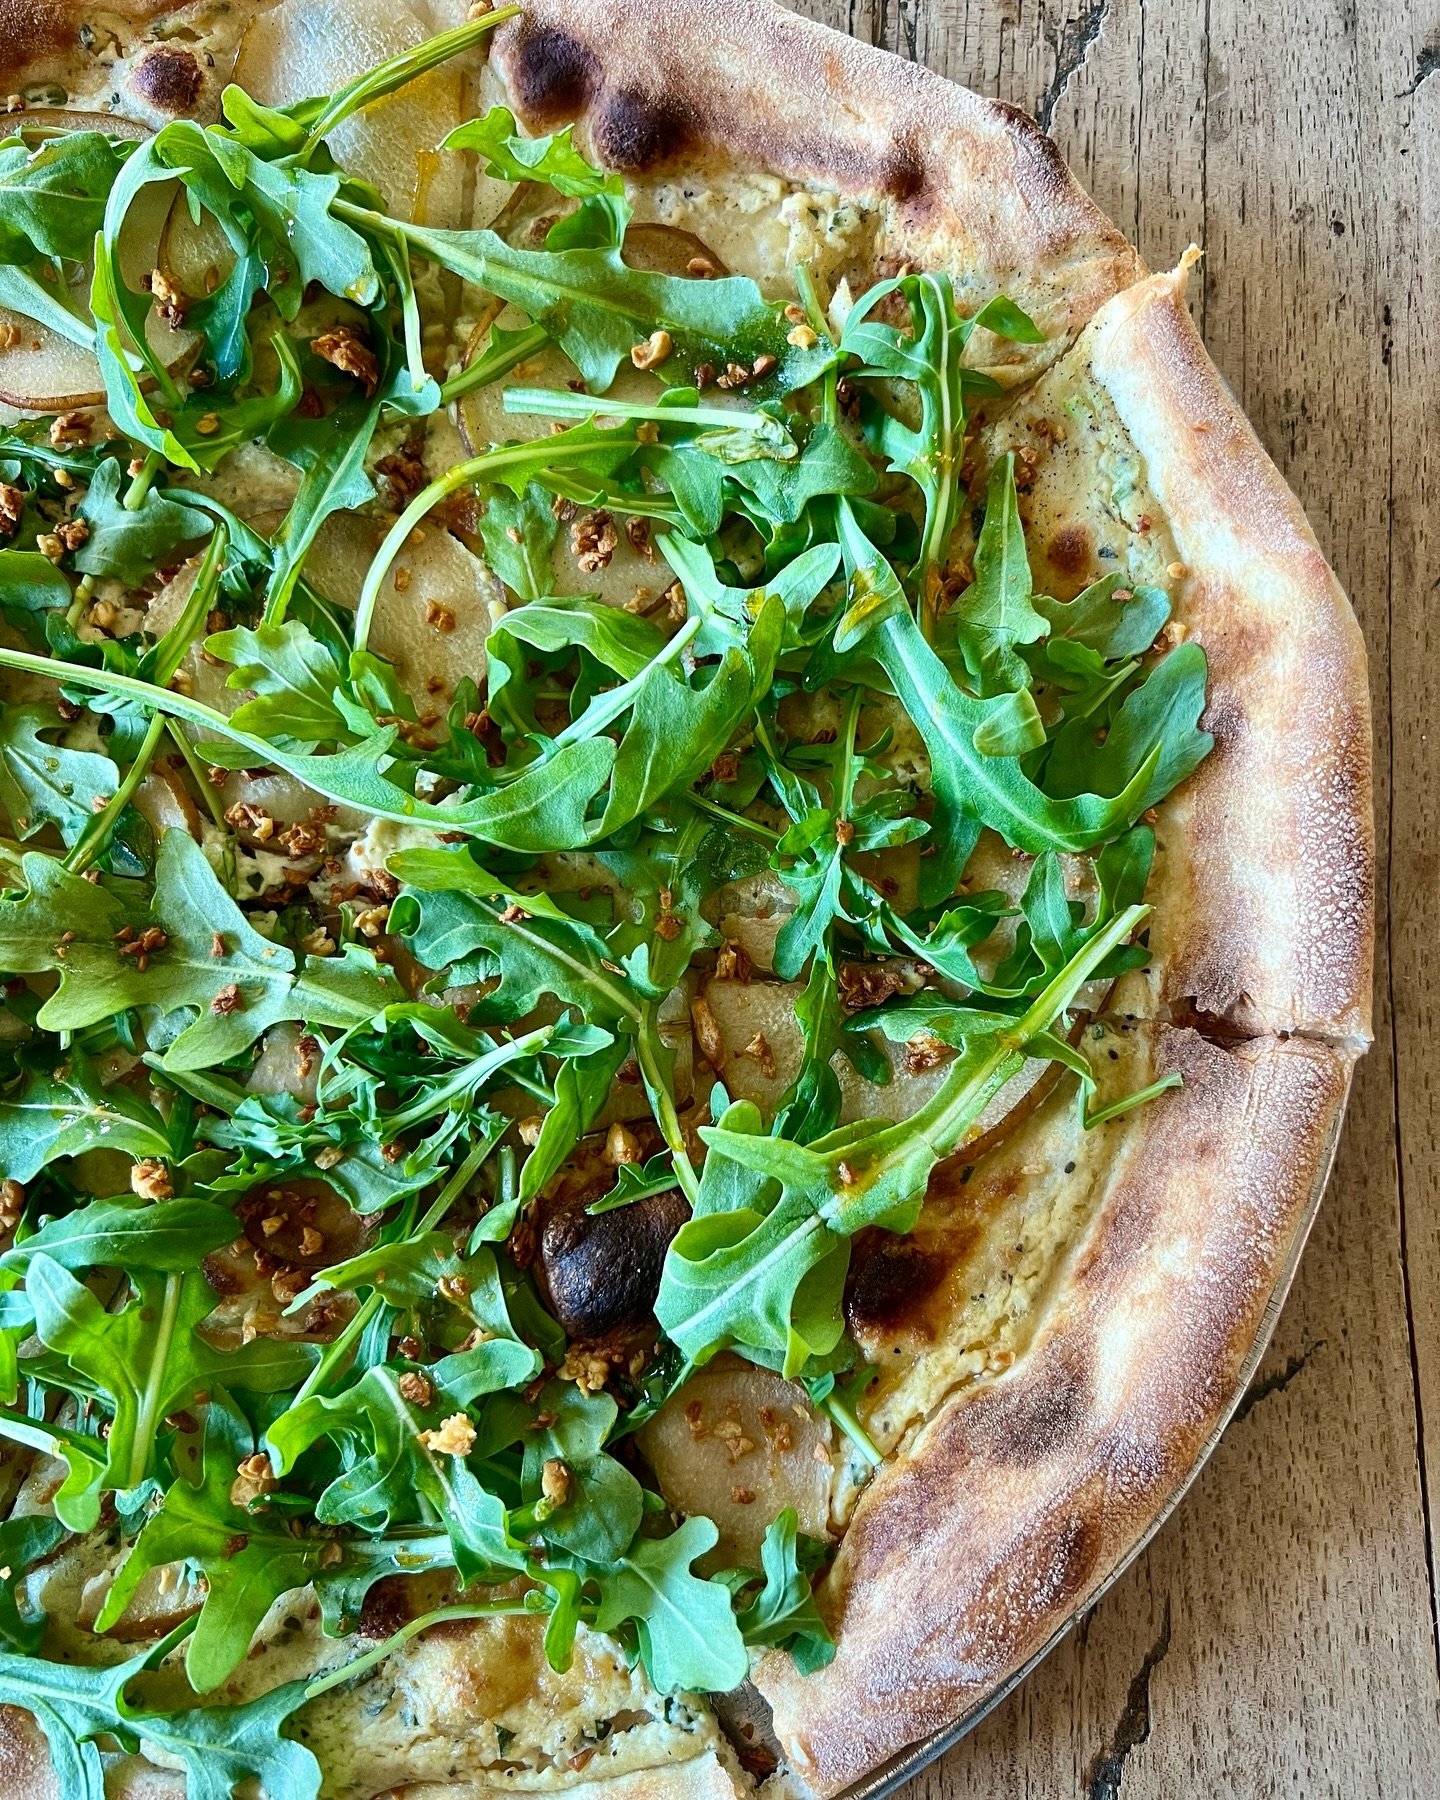 Reno 💚s vegans!  Lots of options for our vegan pals, and you can get any of our pizzas made with Miyoko&rsquo;s cashew cheese or our house vegan tofu ricotta